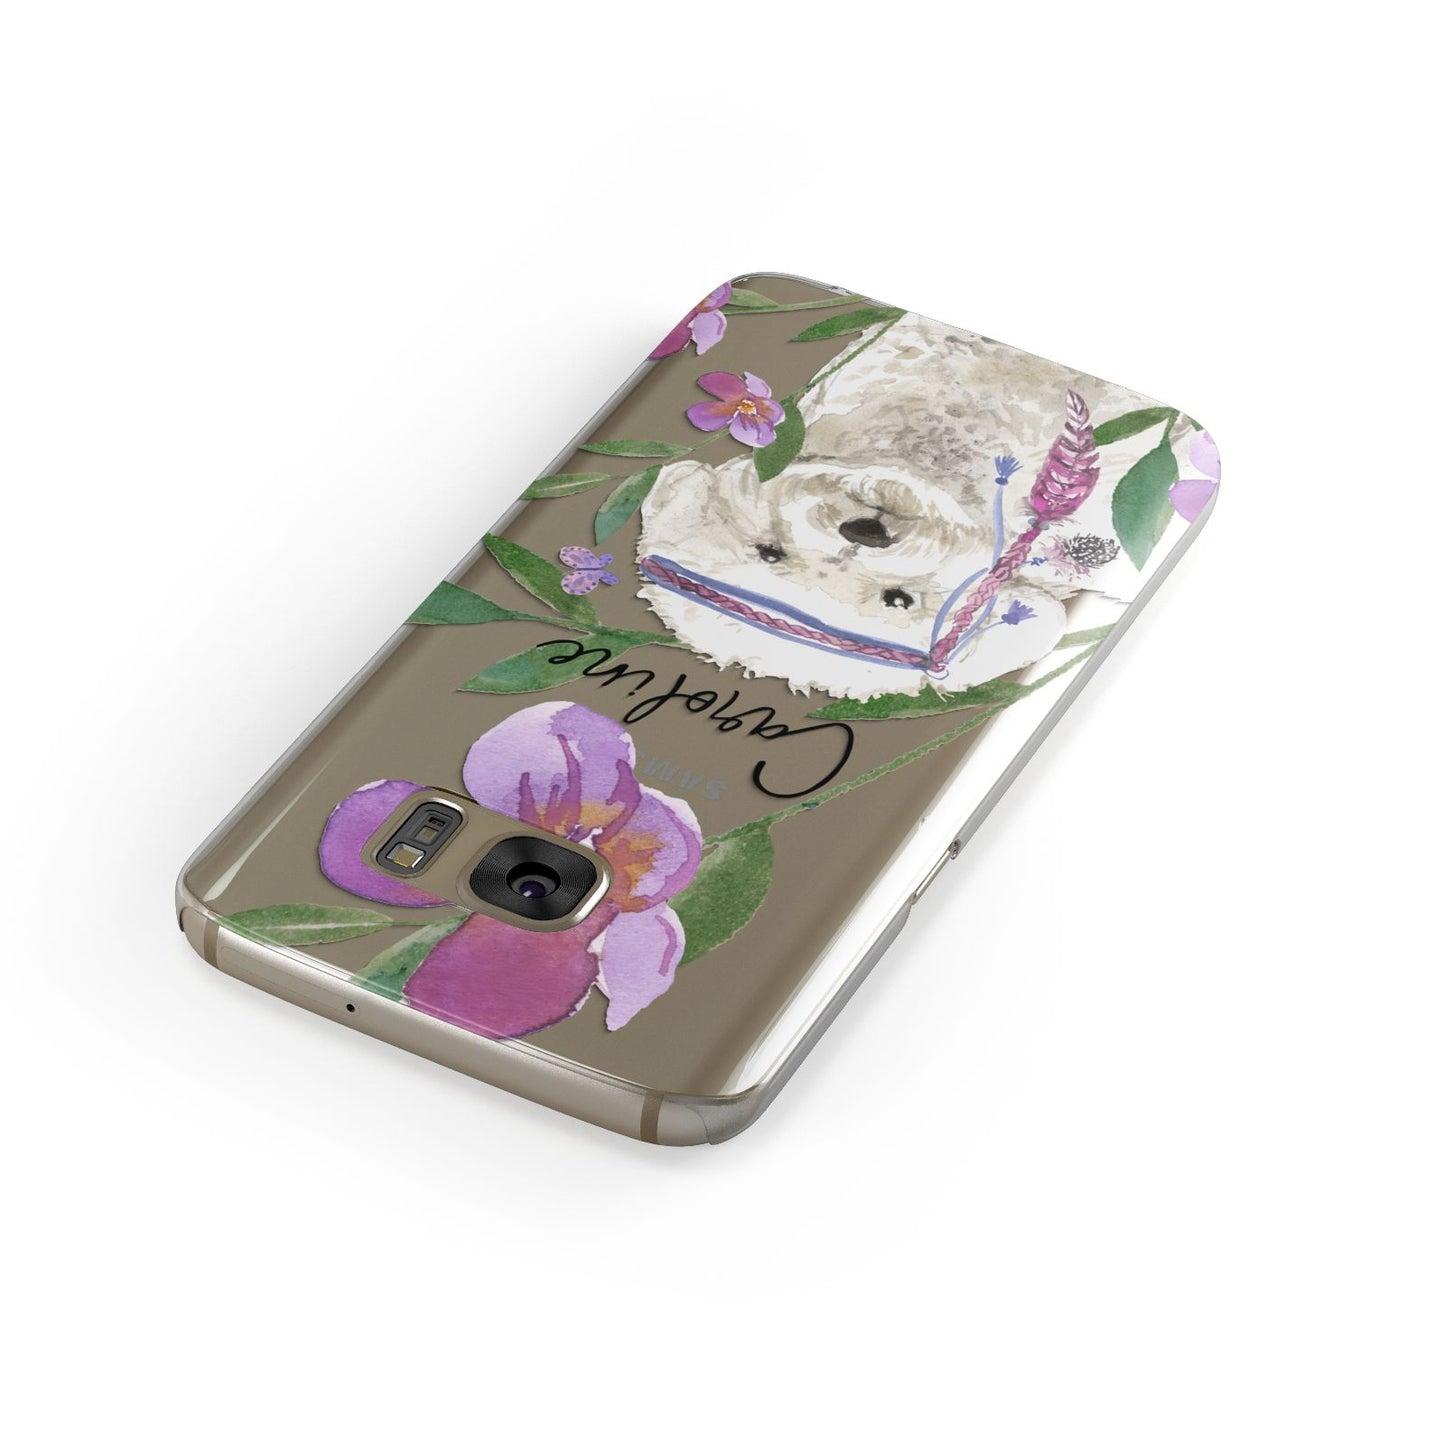 Personalised Bichon Frise Samsung Galaxy Case Front Close Up